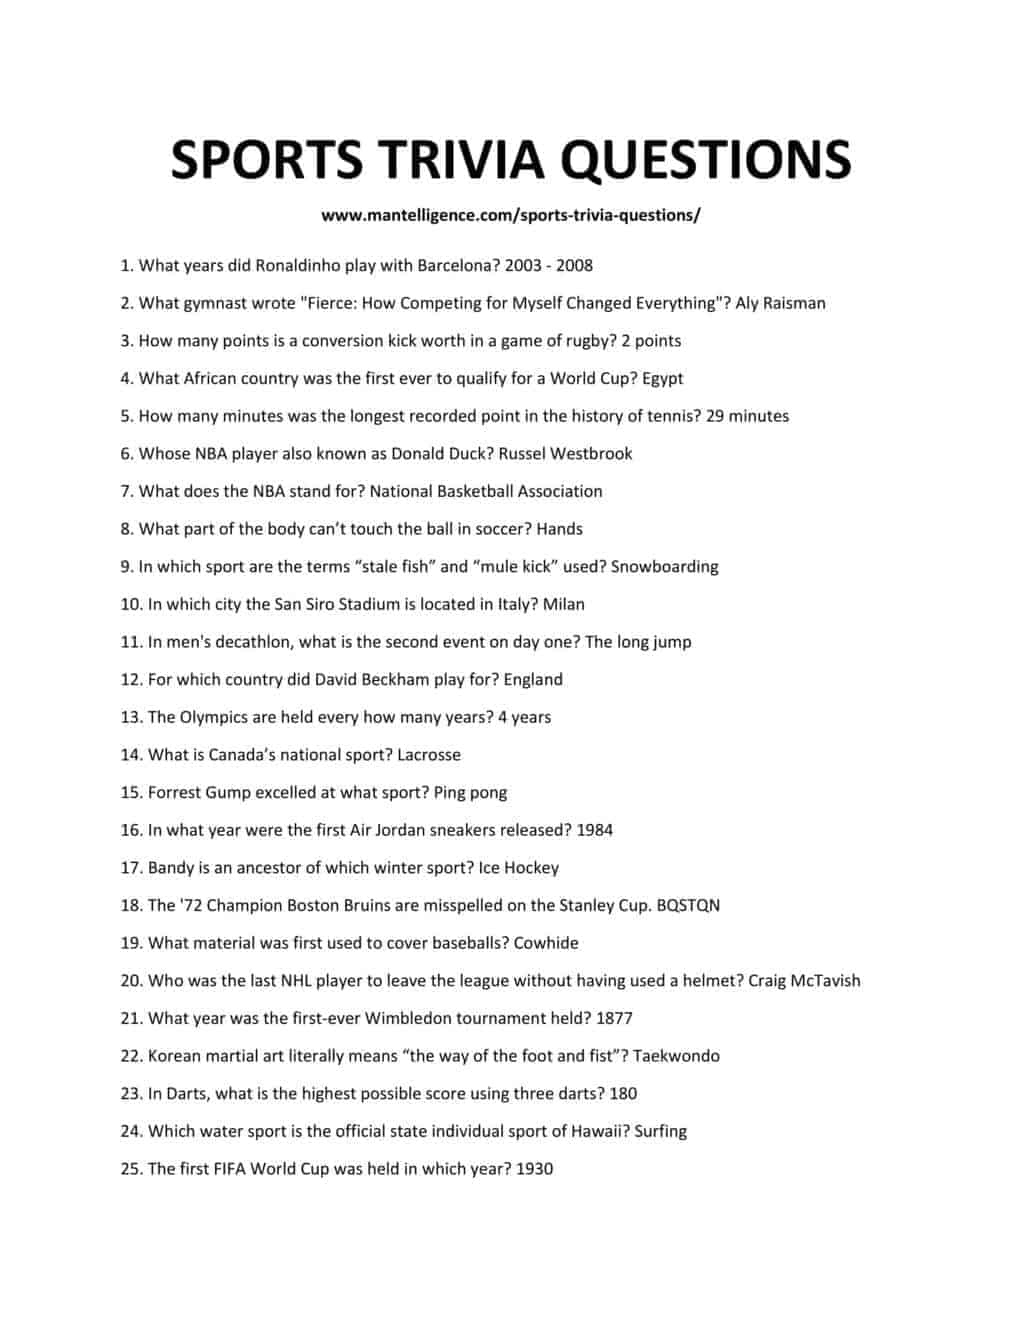 Football Trivia Questions And Answers UK